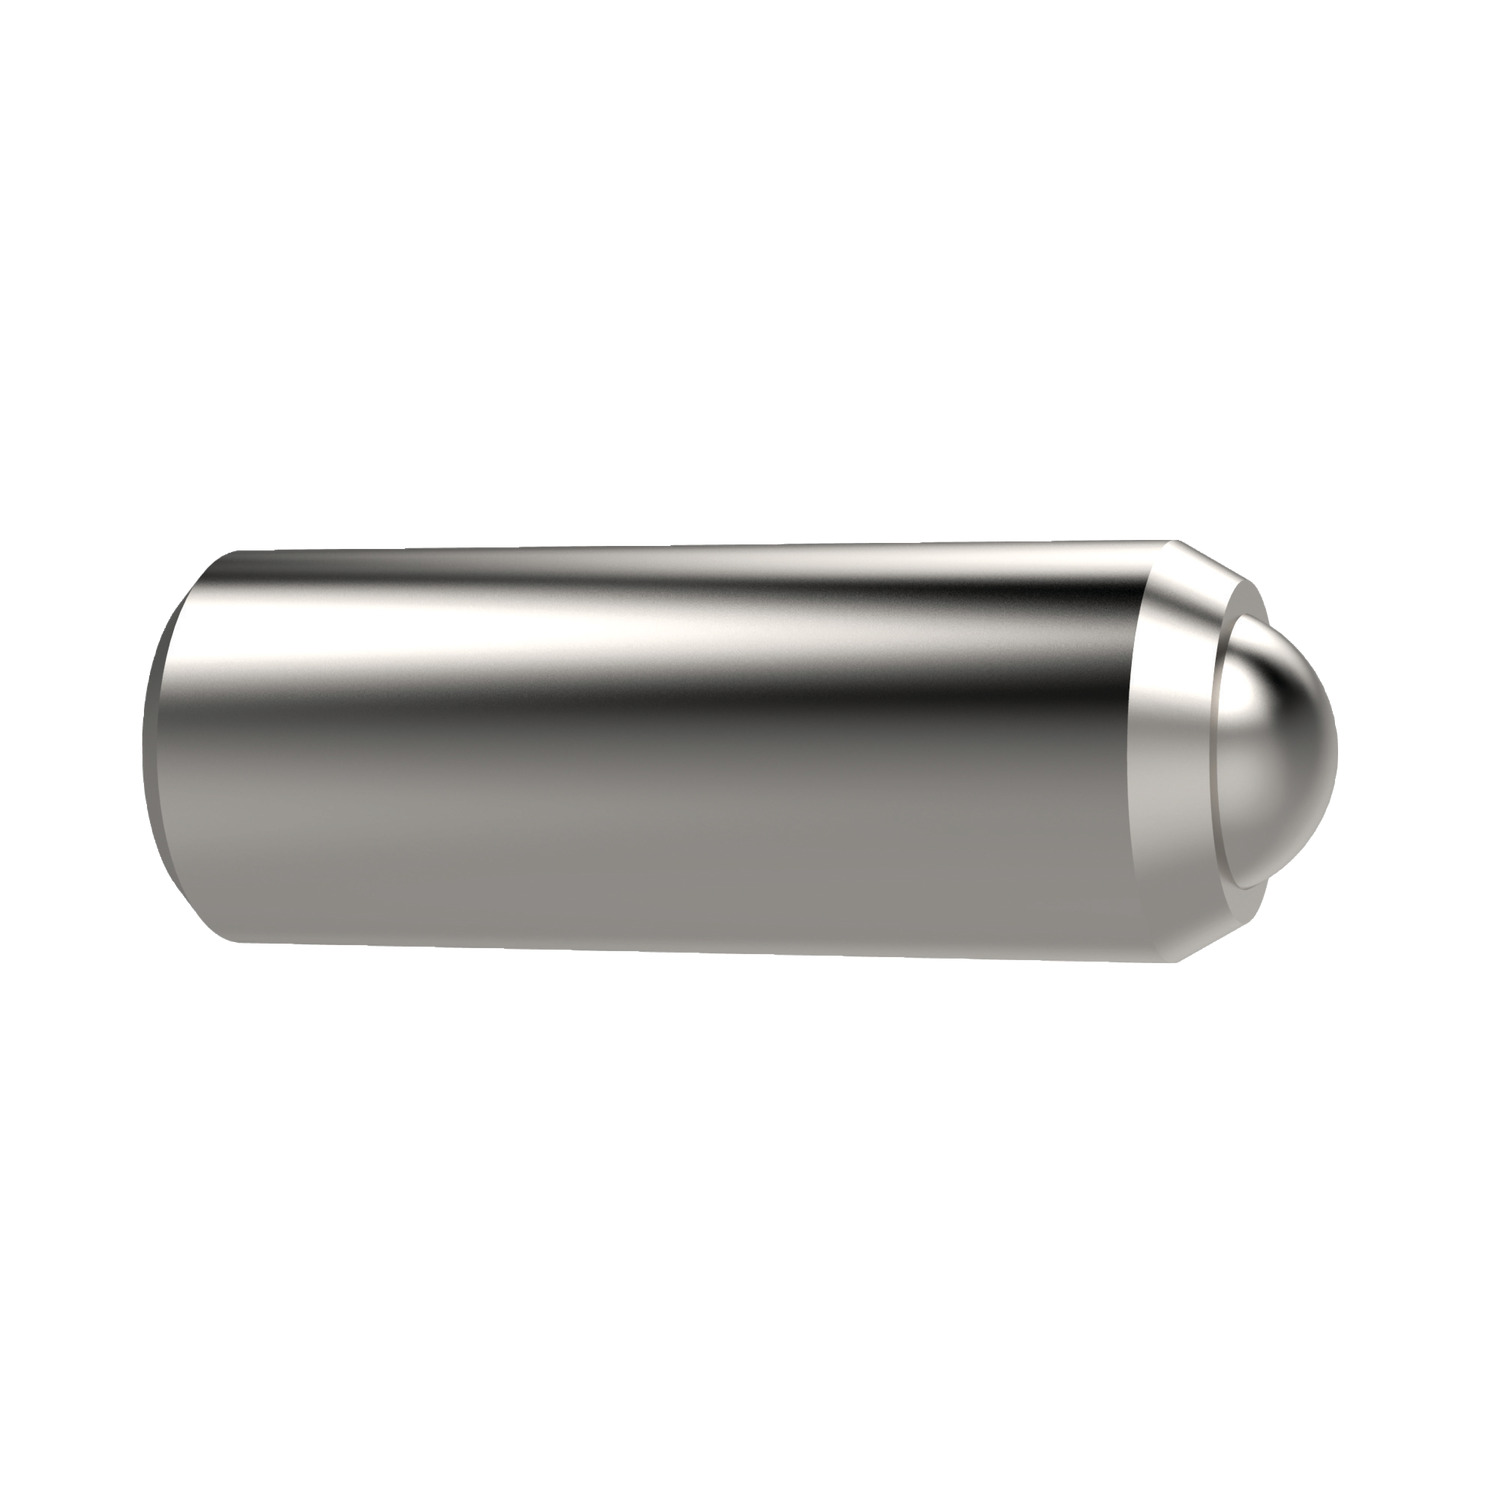 32280.W0372 Spring Plunger - Ball - Smooth Model All Stainless - 5,5 - 4,0 - 14,0 EC:20253110 WG:05063052078804